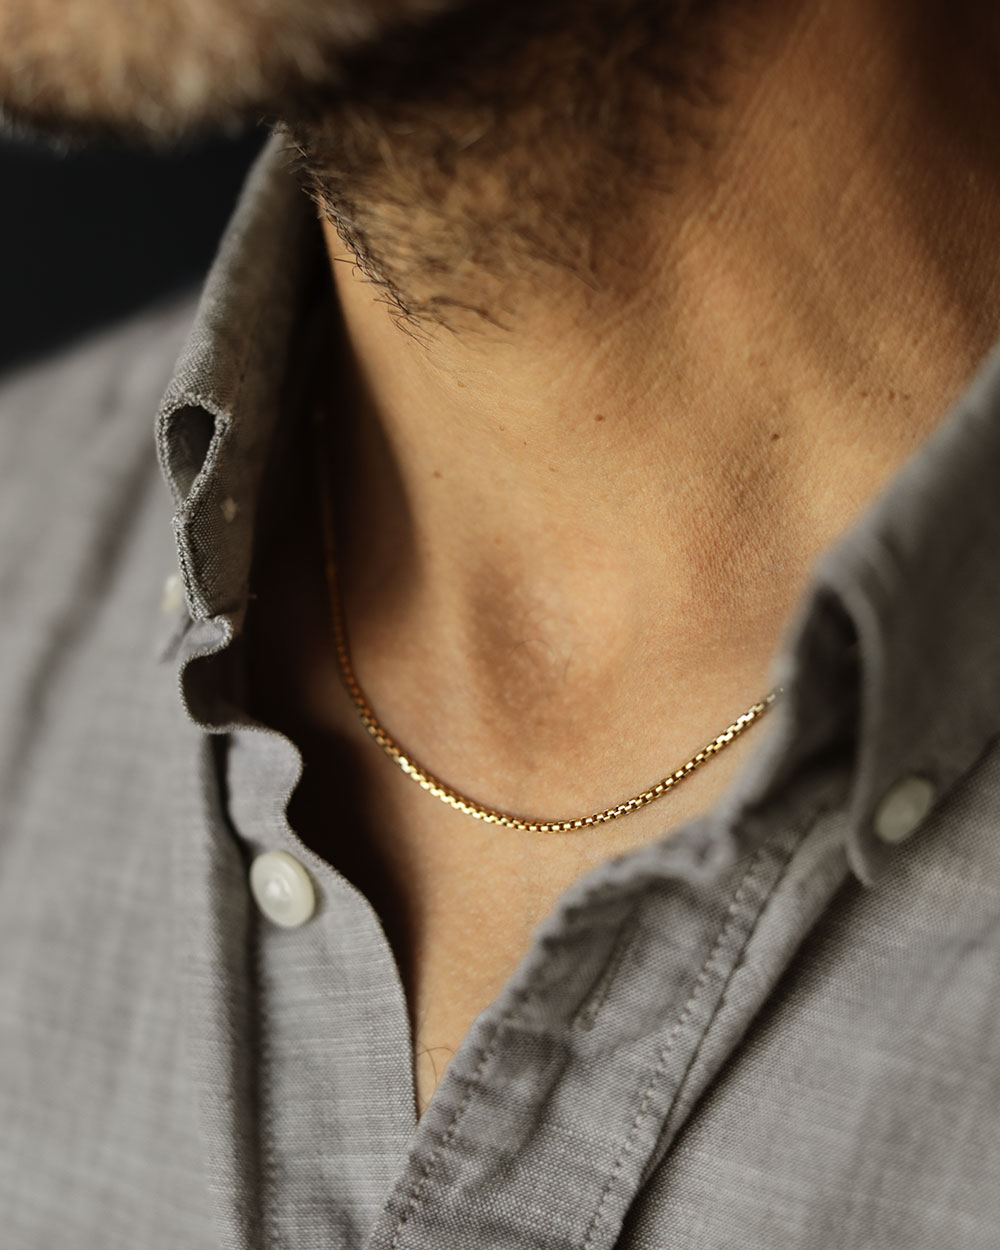 Man's neck and denim collared shirt with a solid yellow gold box chain by George Rings 14k yellow gold in size 16" with a lobster clasp.